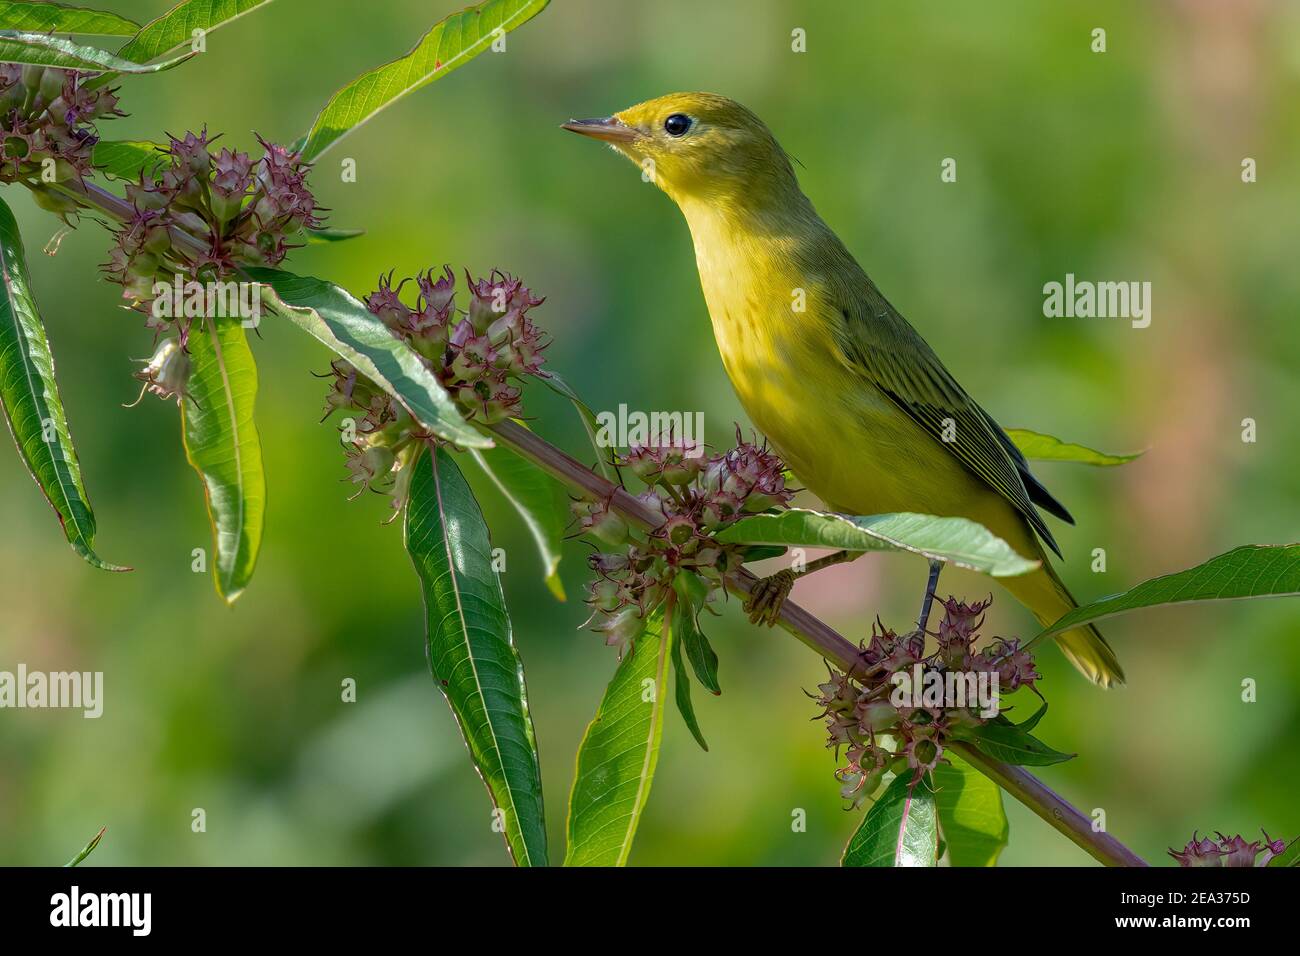 Yellow Warbler perched on a branch during spring migration Stock Photo